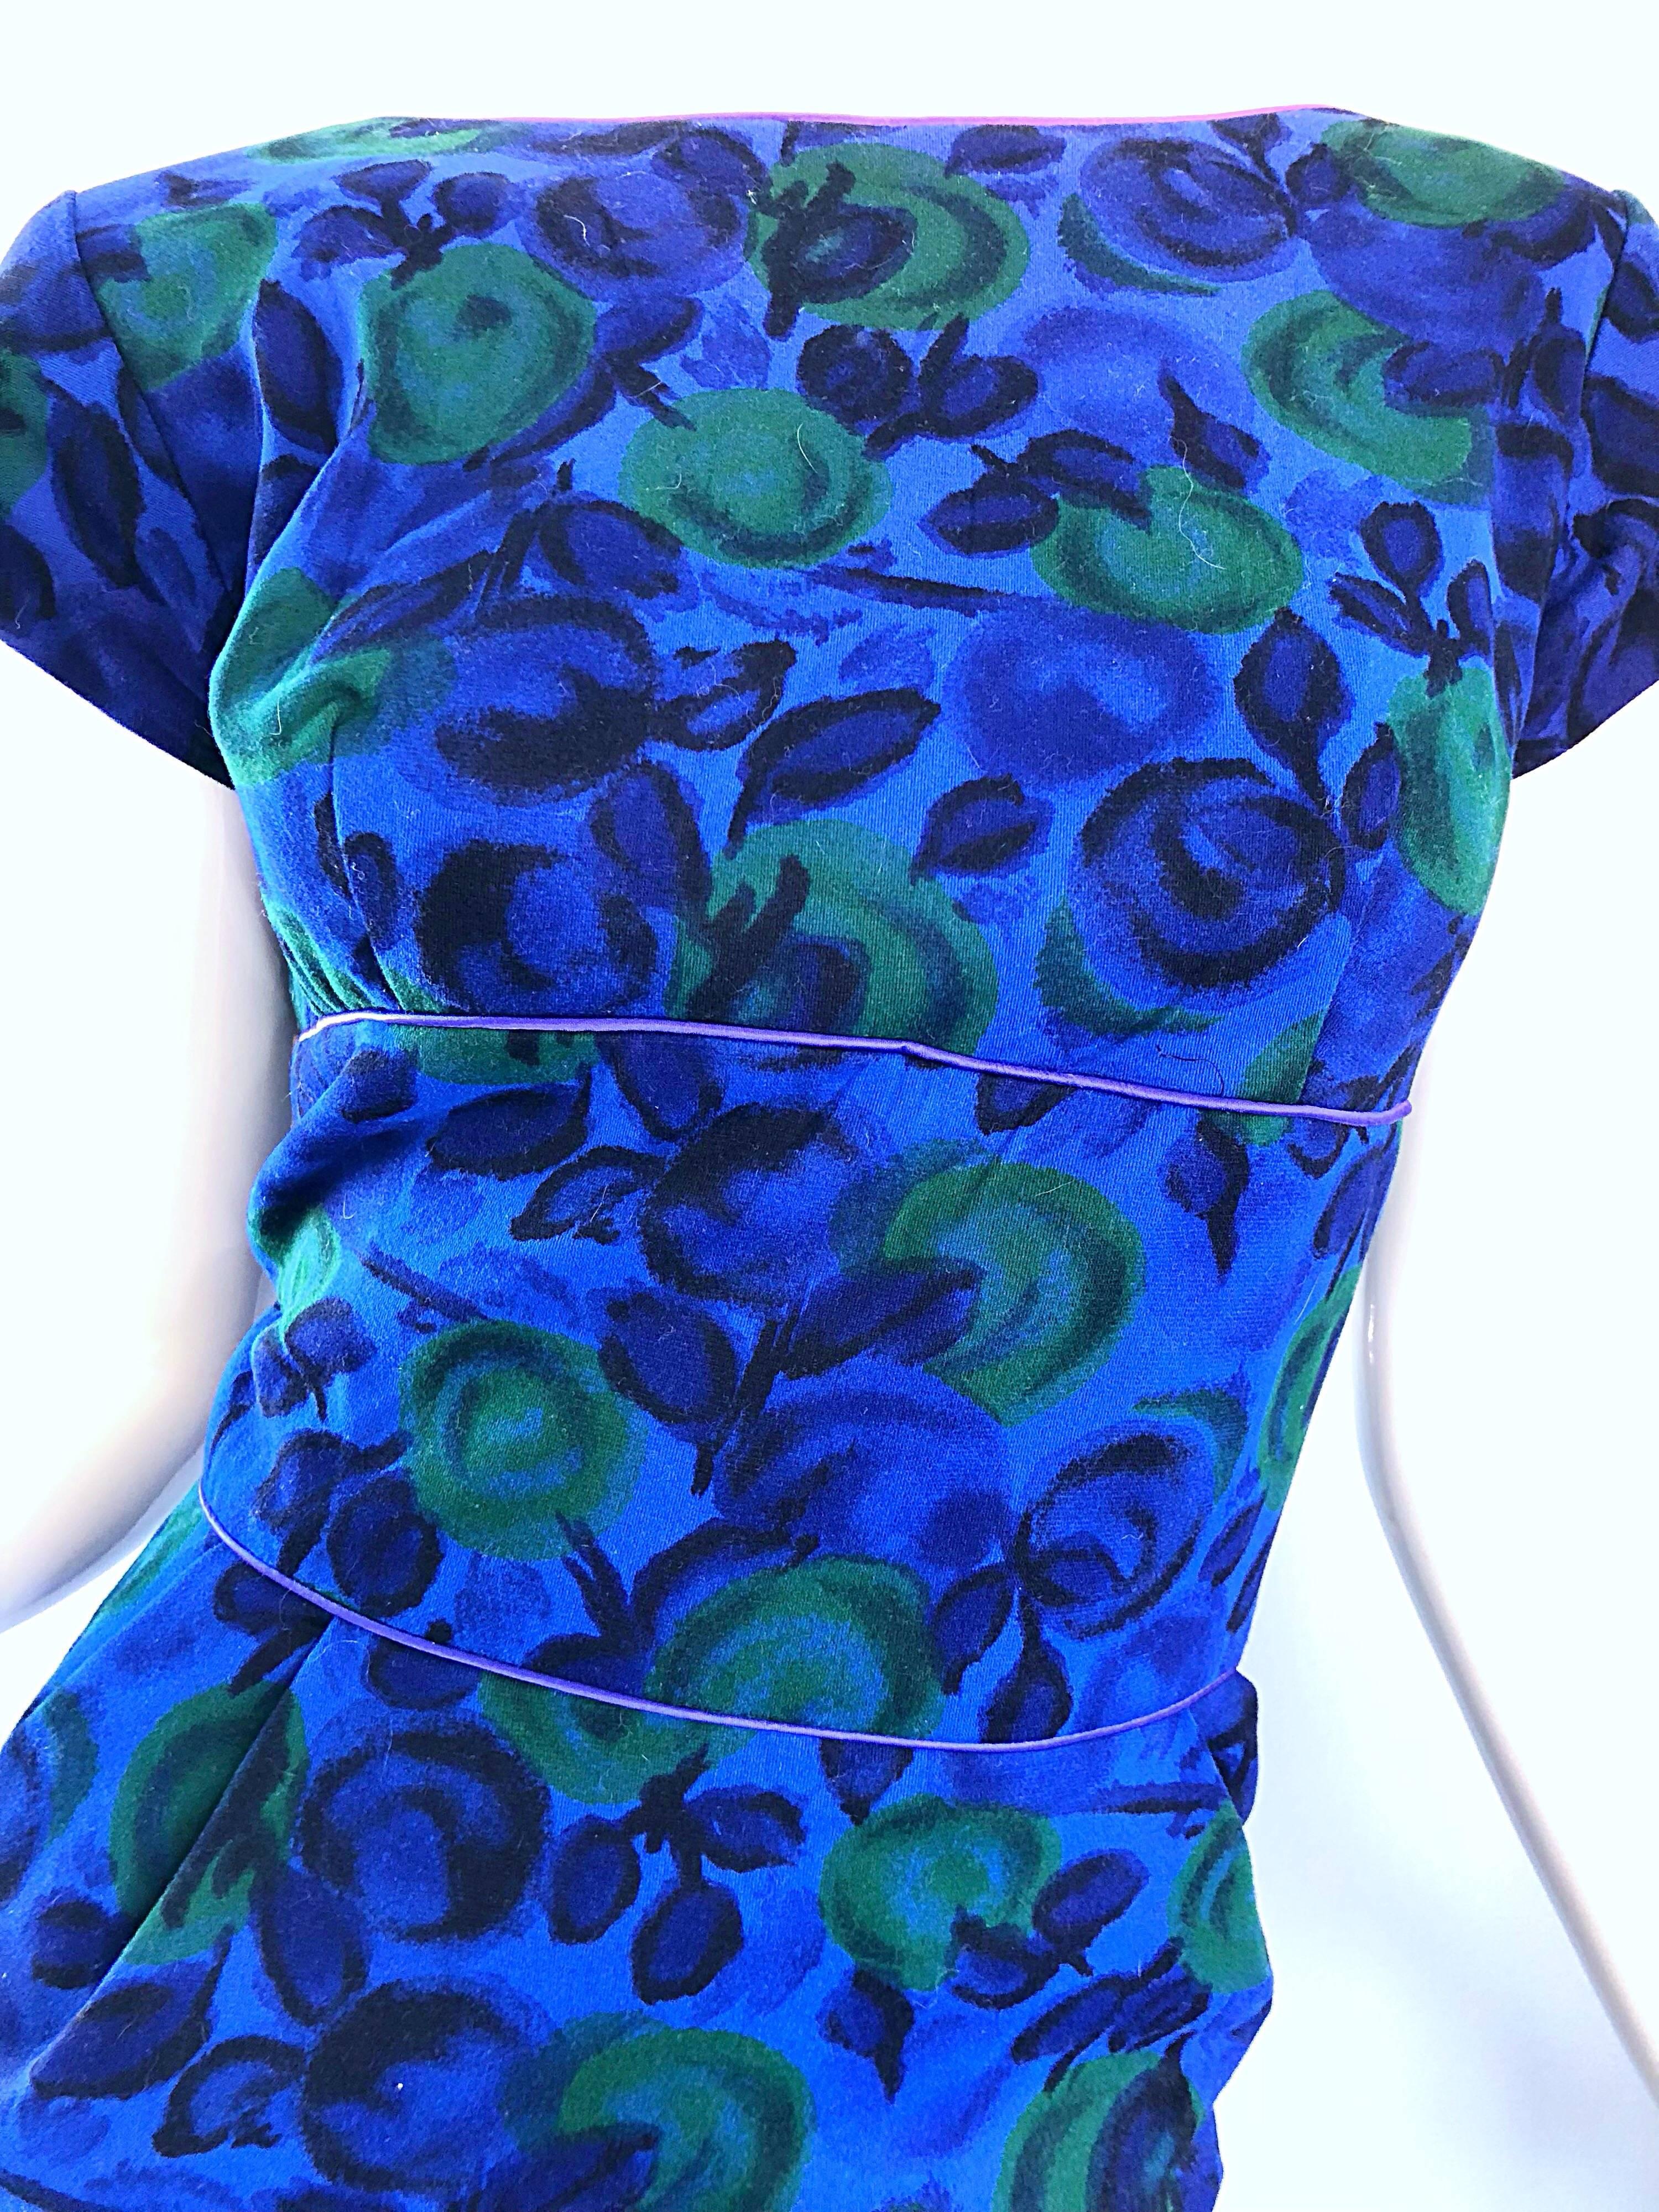 Beautiful 1950s royal blue and green fruit print wool wiggle dress! Fabulous flattering fit that stretches to fit the body. Short cap sleeves. Full metal zipper up the back with hook-and-eye closure. Super soft wool blend that is fully lined. Very